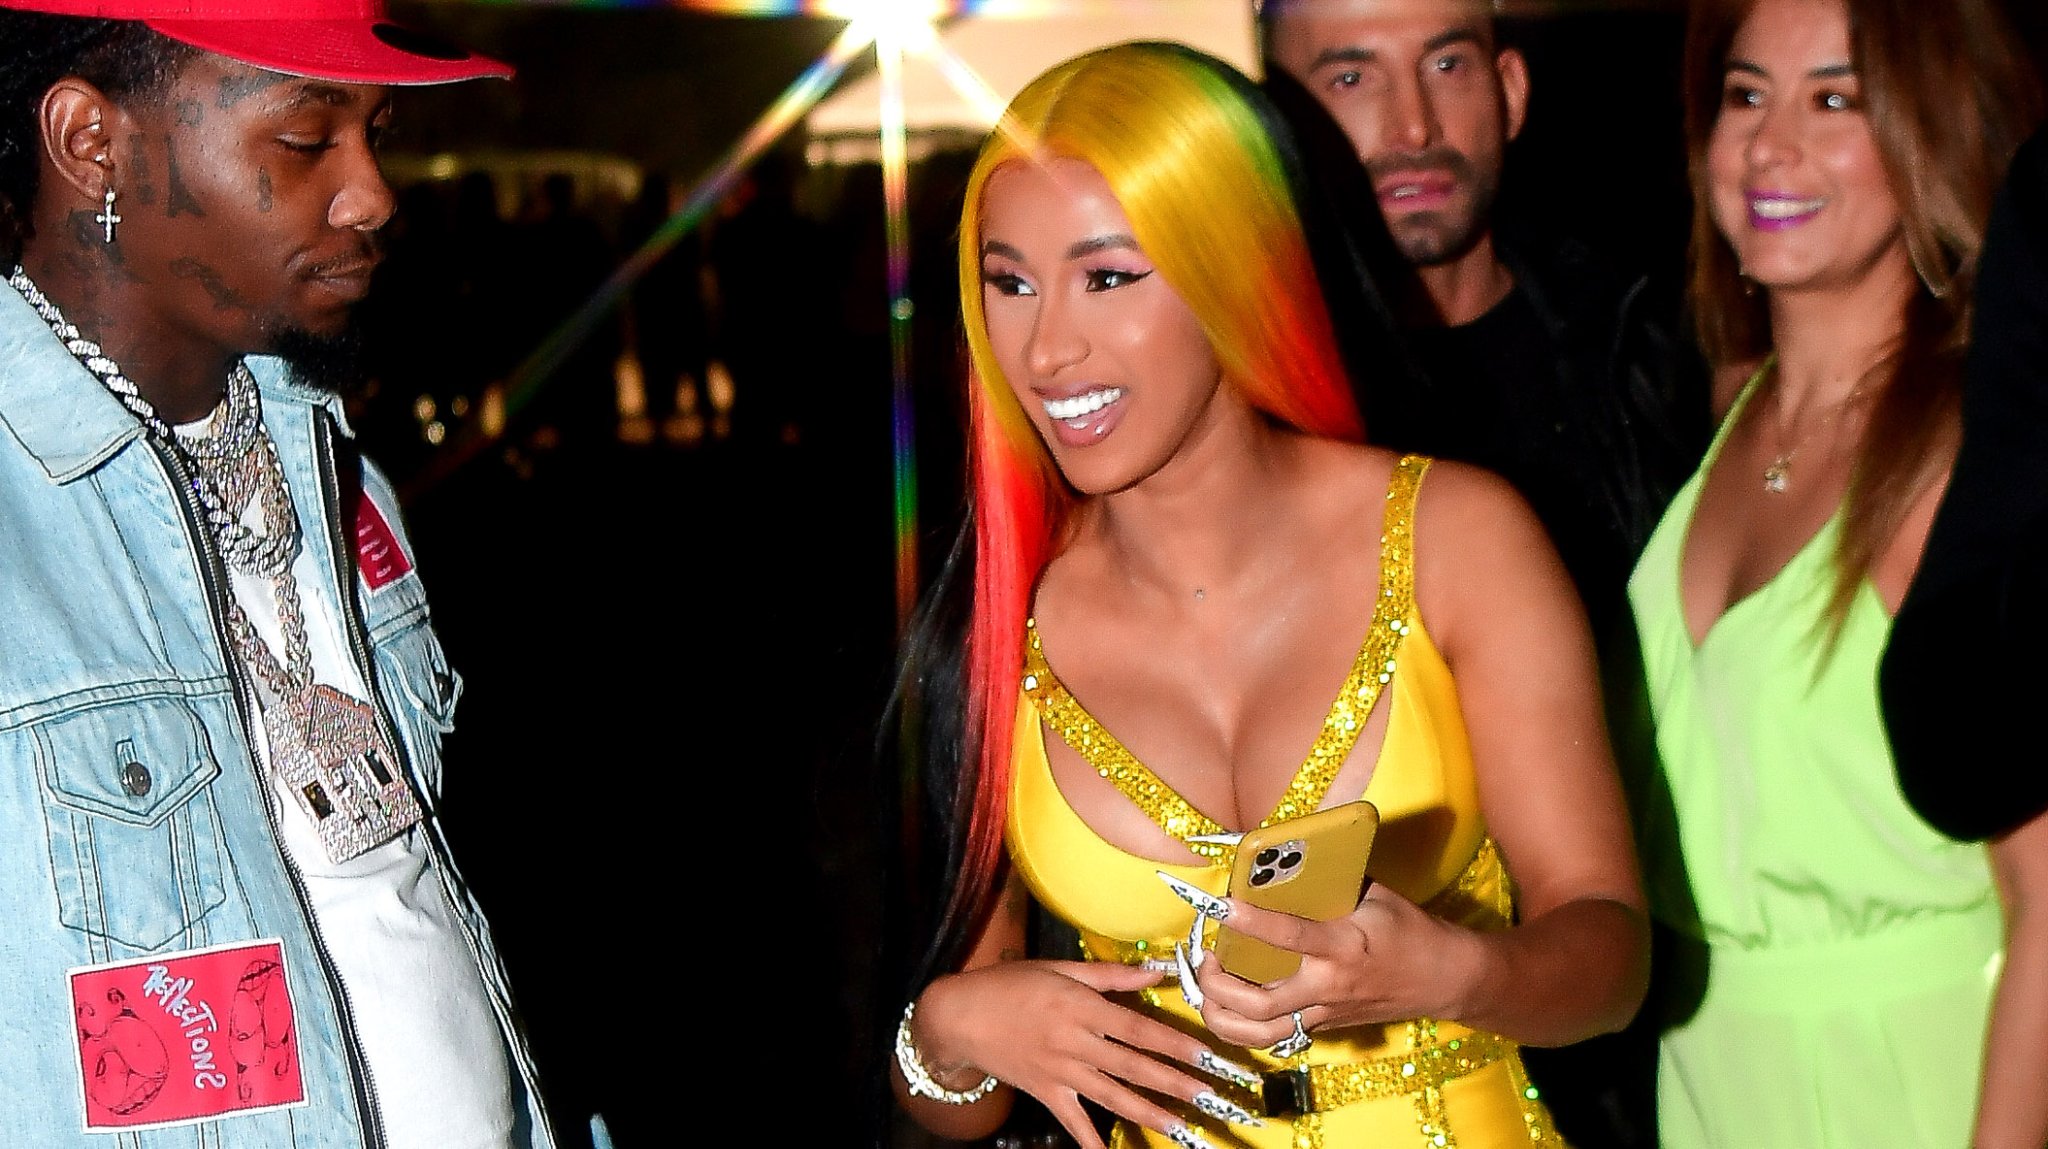 The Amount Of Money Celebrities Like Cardi B Reportedly Make Per Month On OnlyFans Is Just Absurd - BroBible